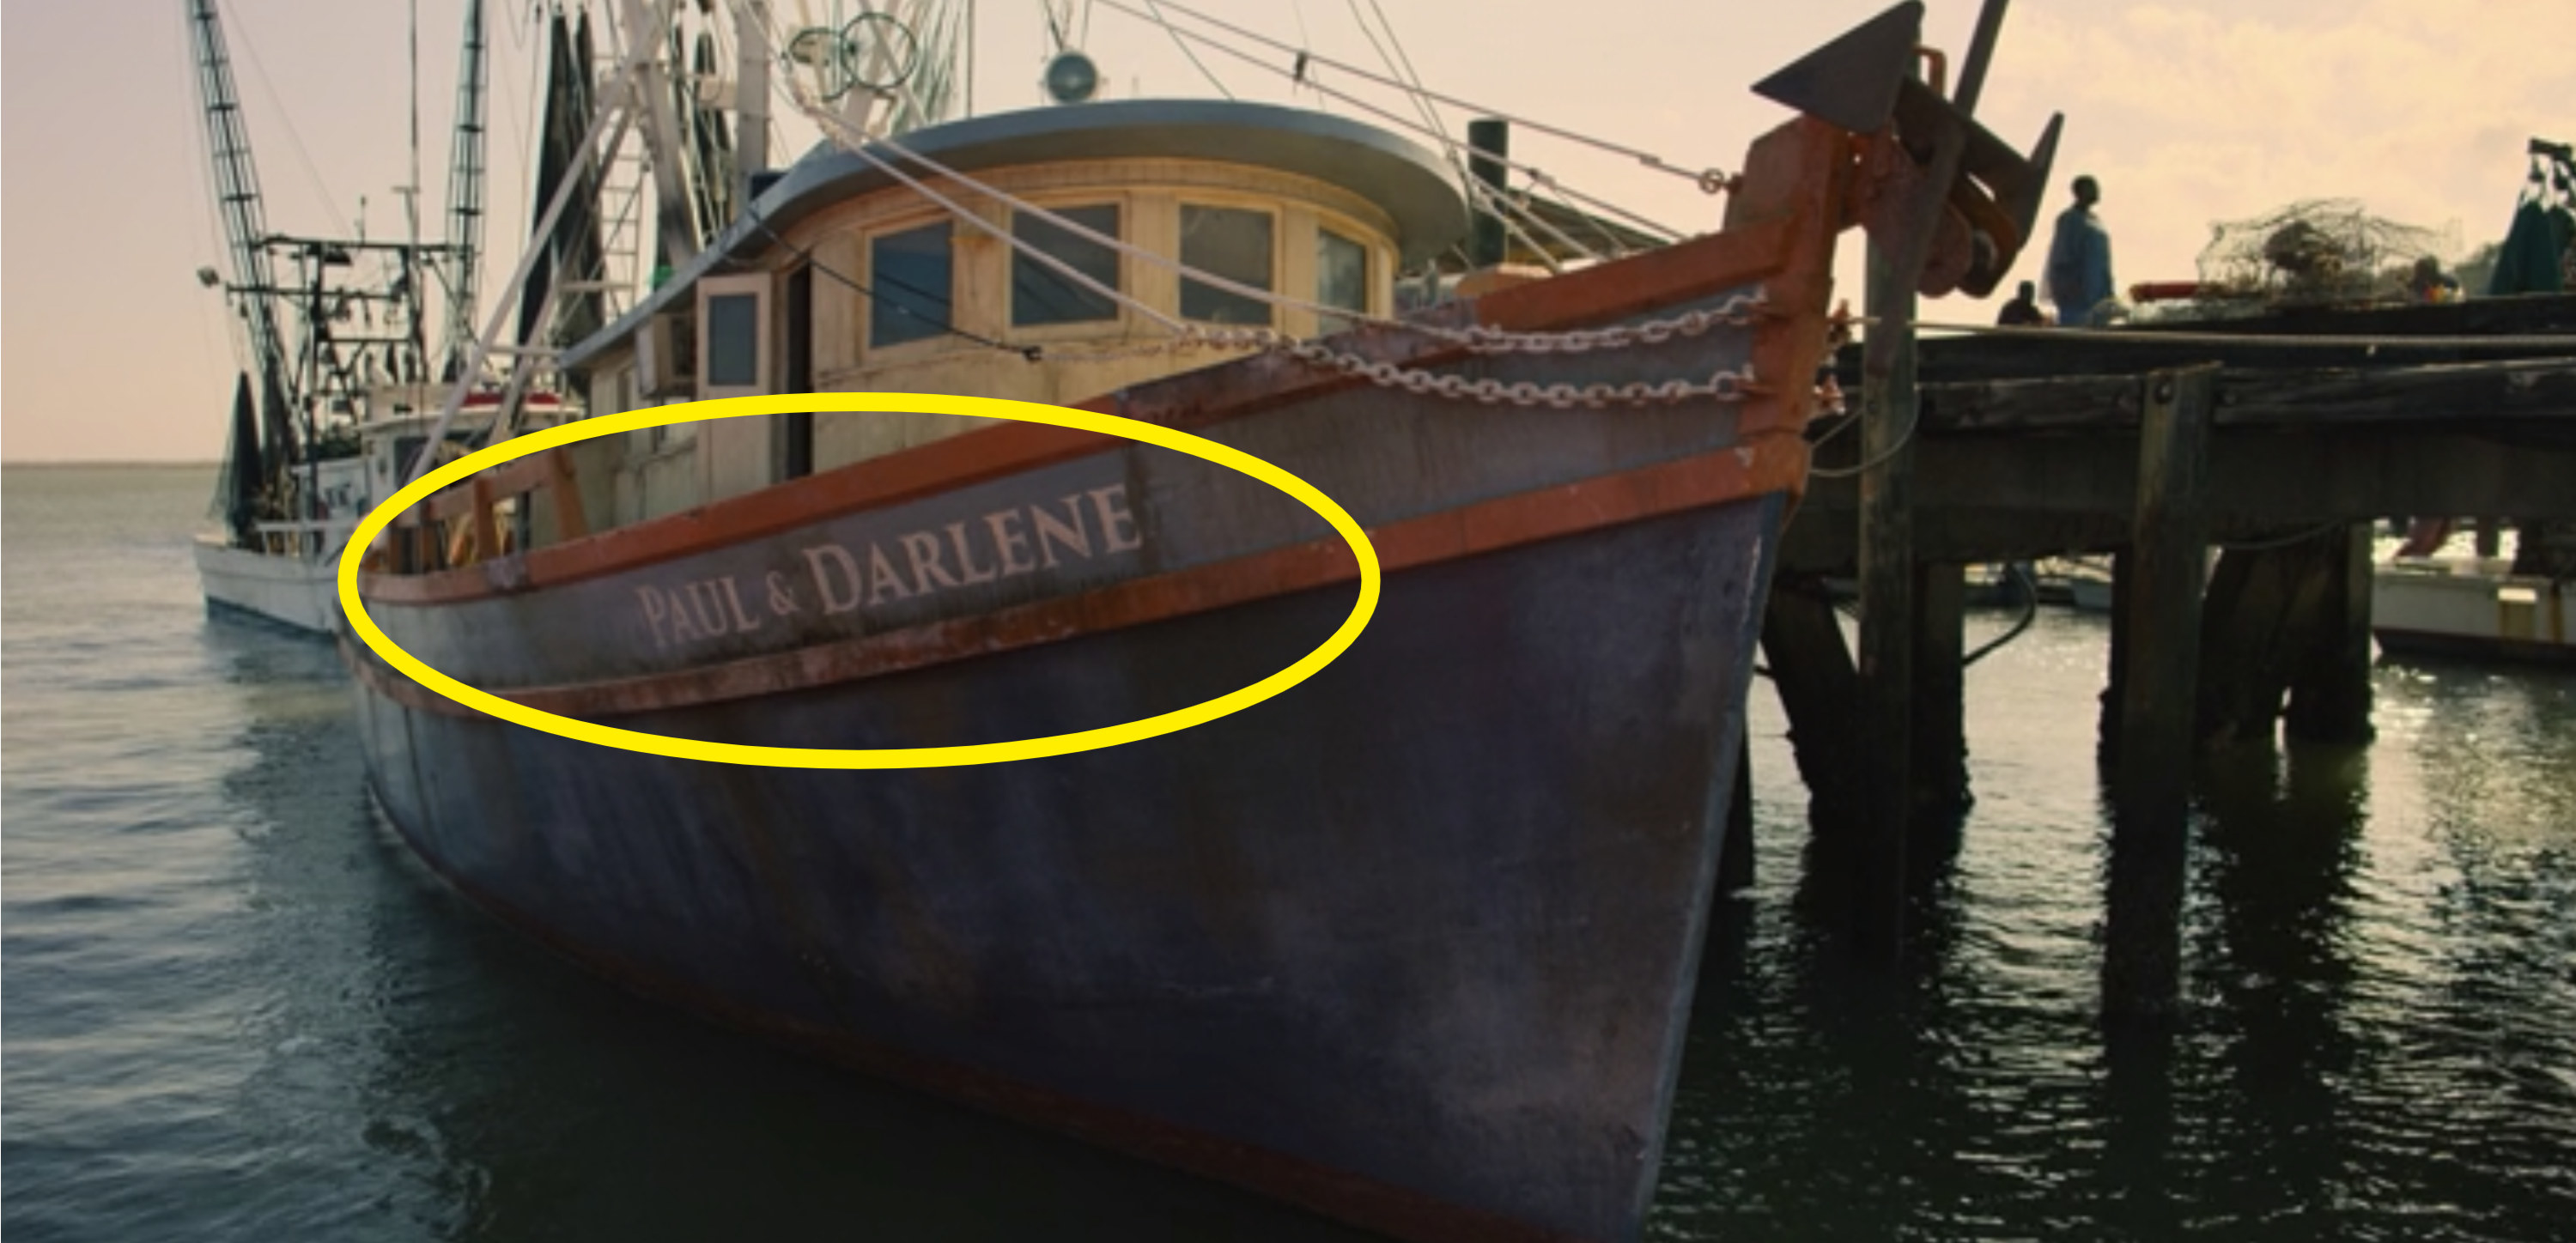 A yellow circle around &quot;Paul &amp;amp; Darlene&quot; on the side of a boat